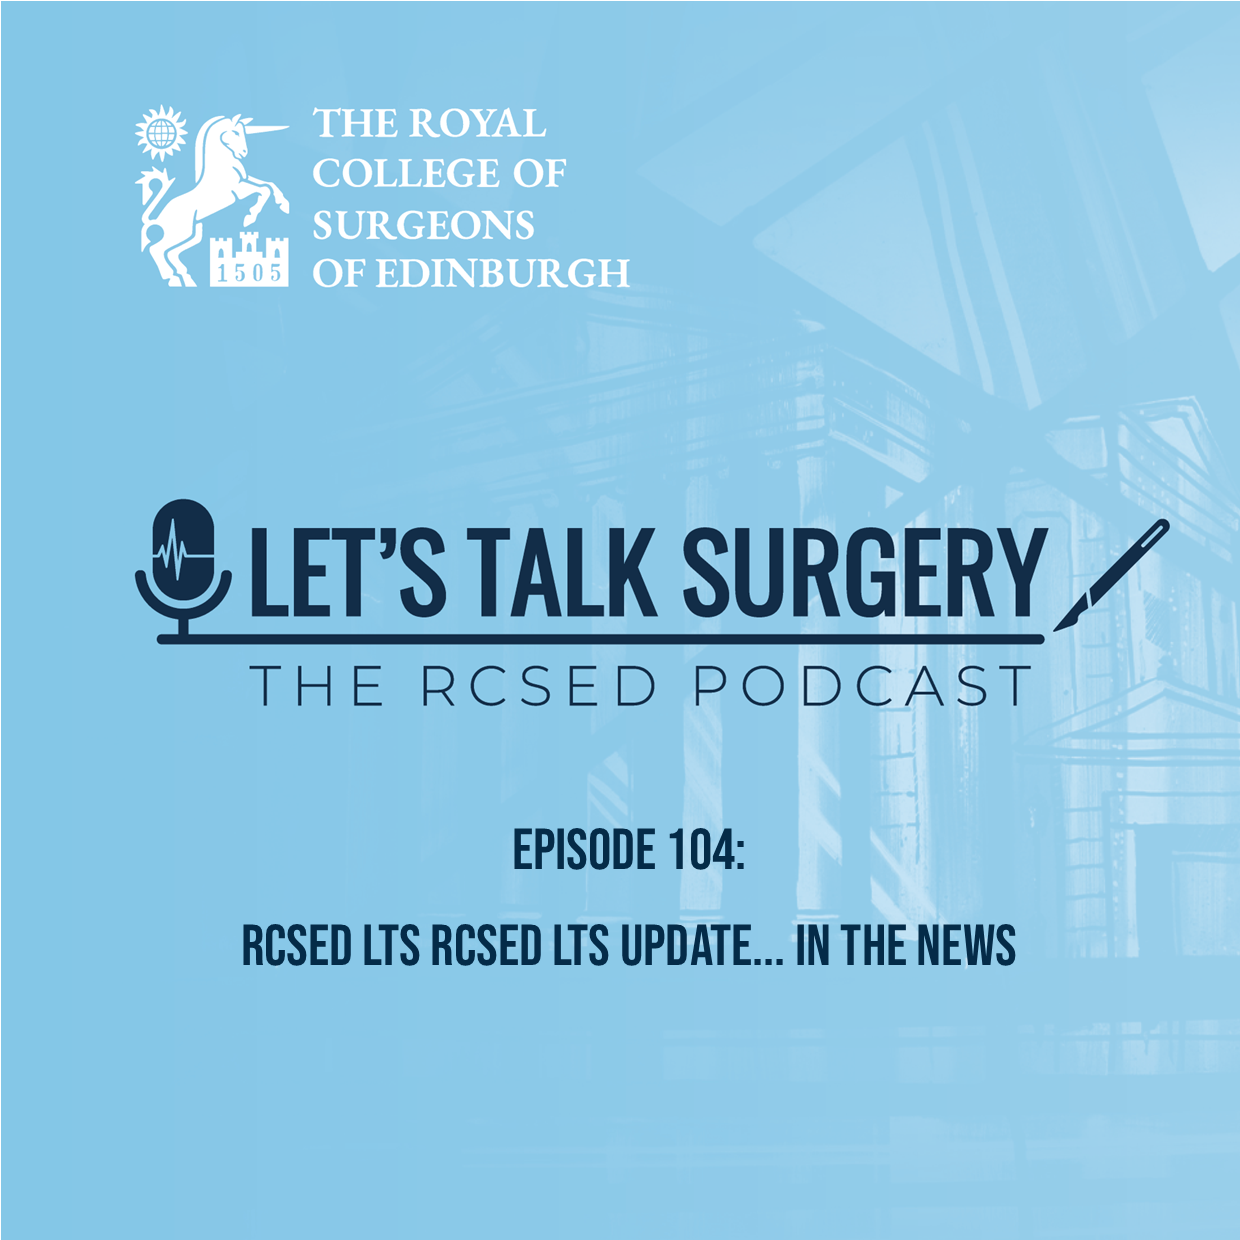 RCSED LTS update... in the news